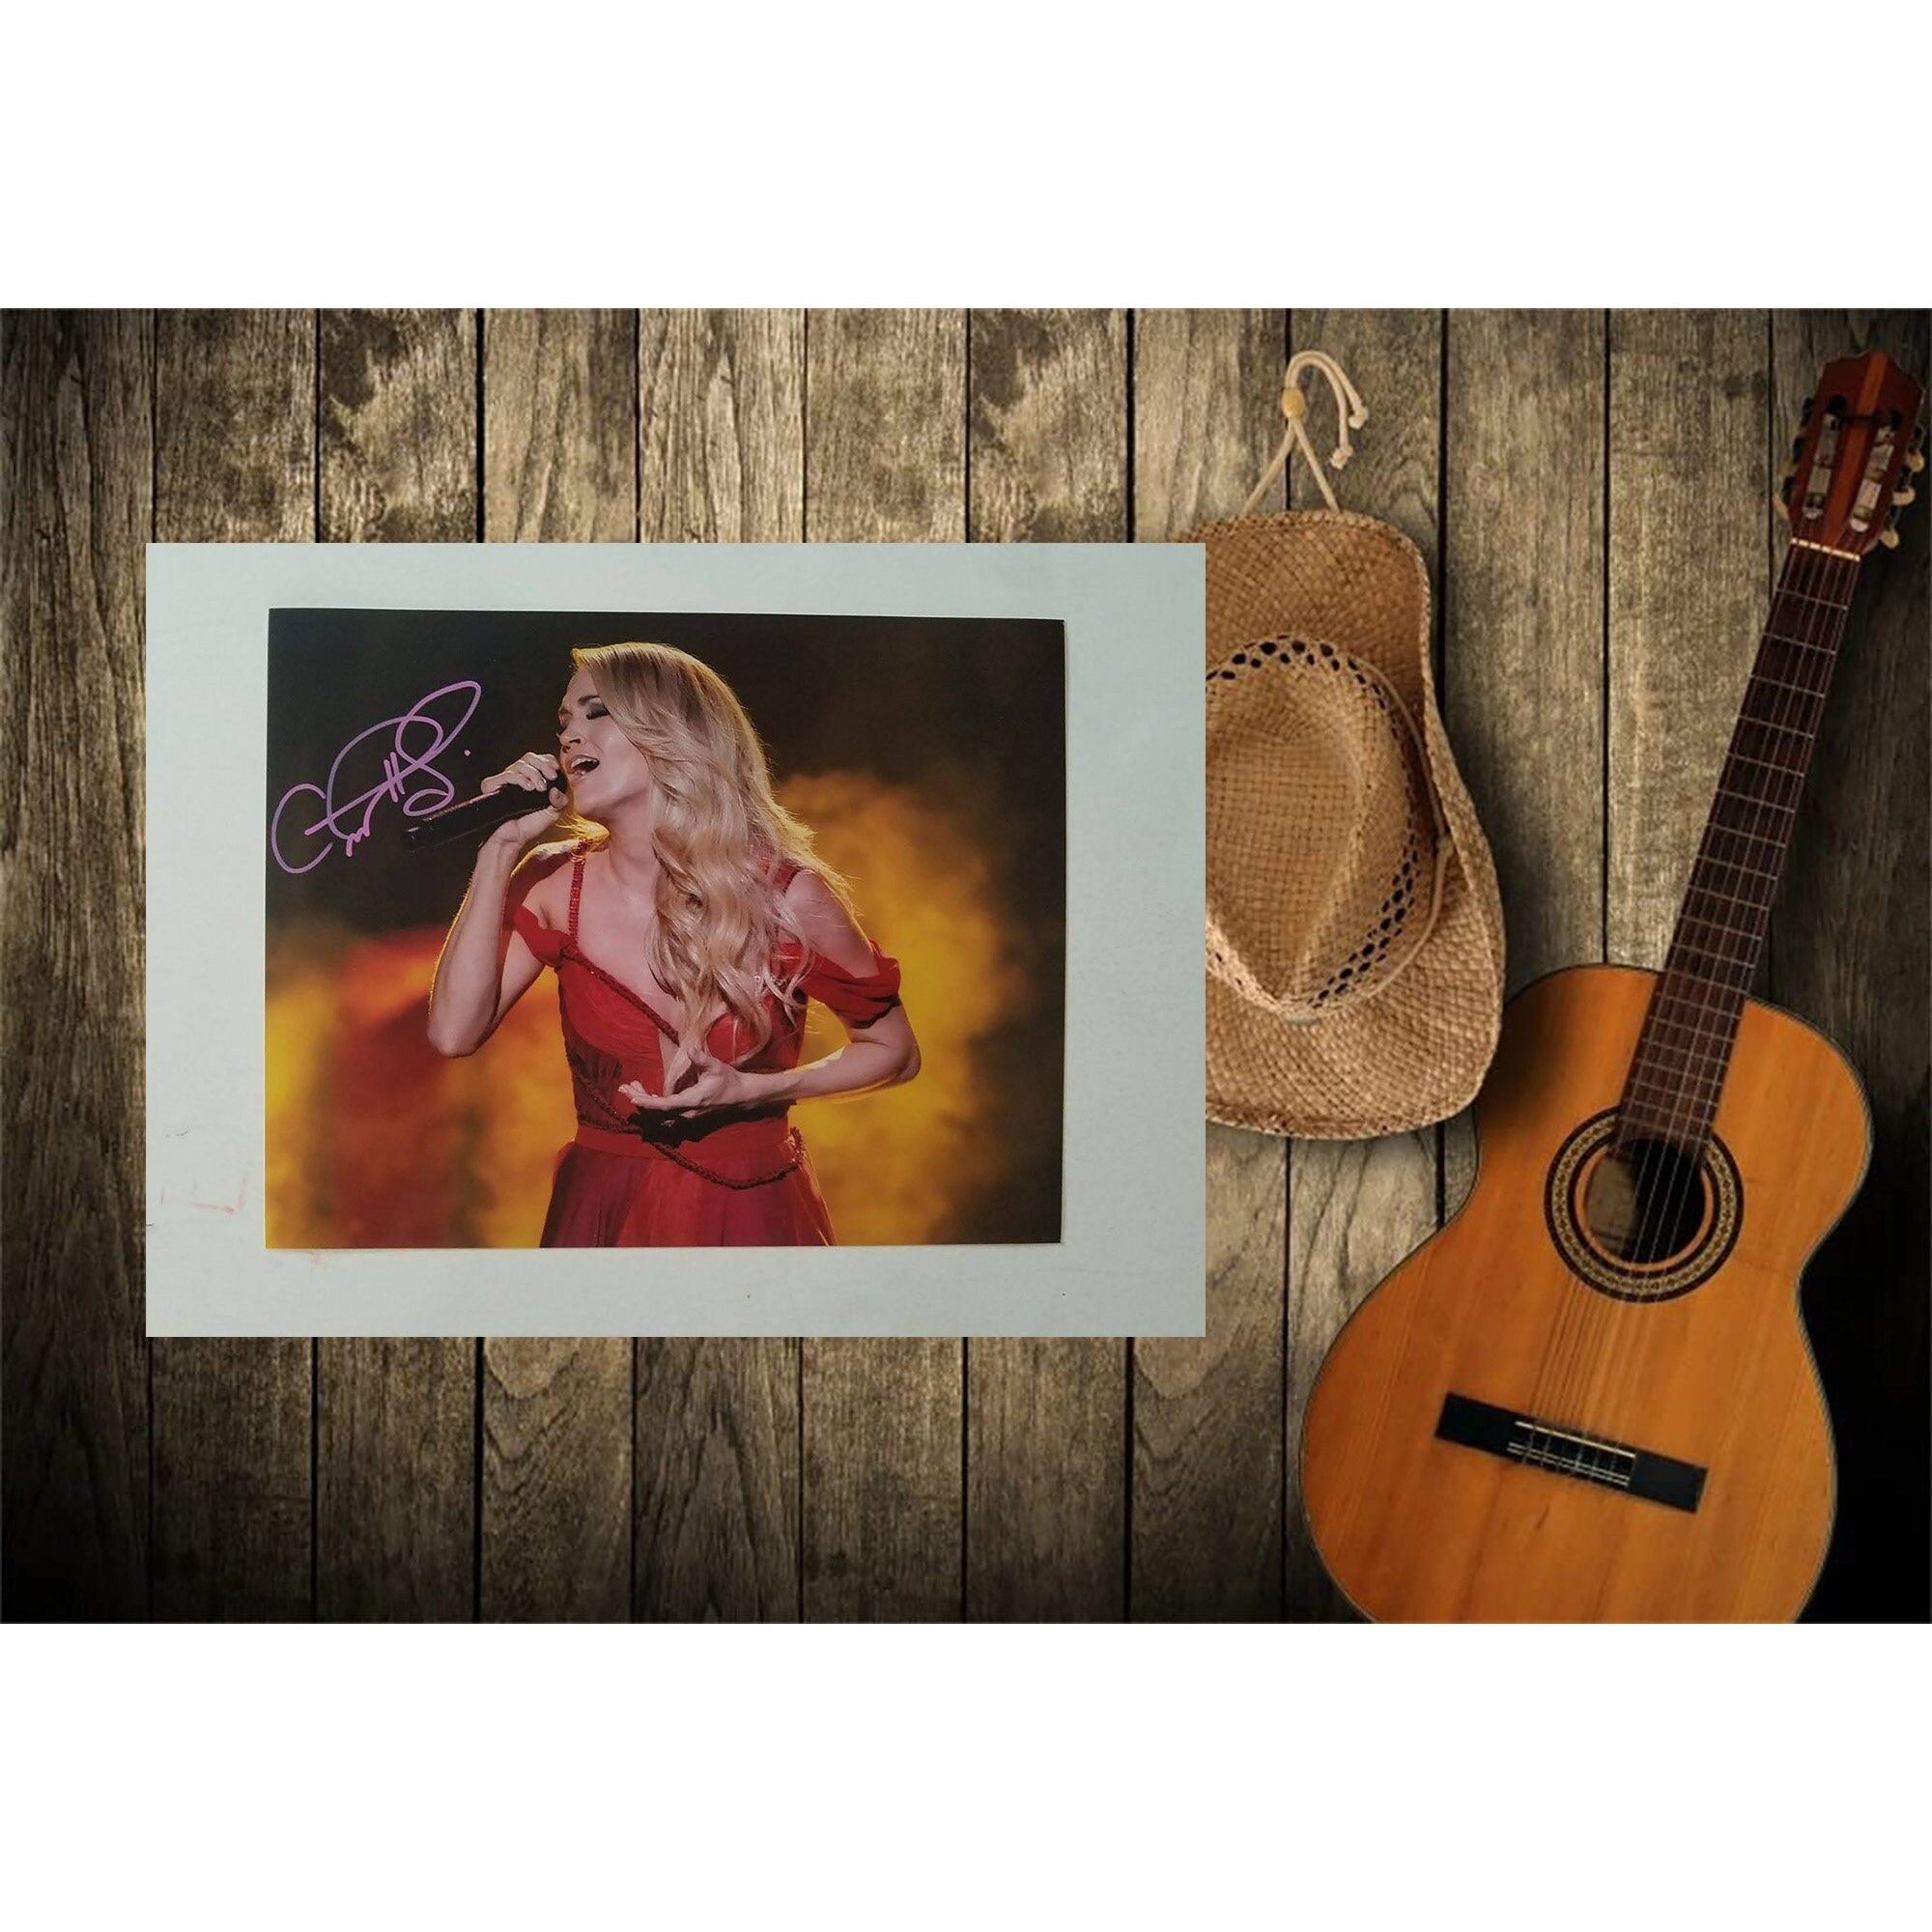 Carrie Underwood 8 x 10 signed photo